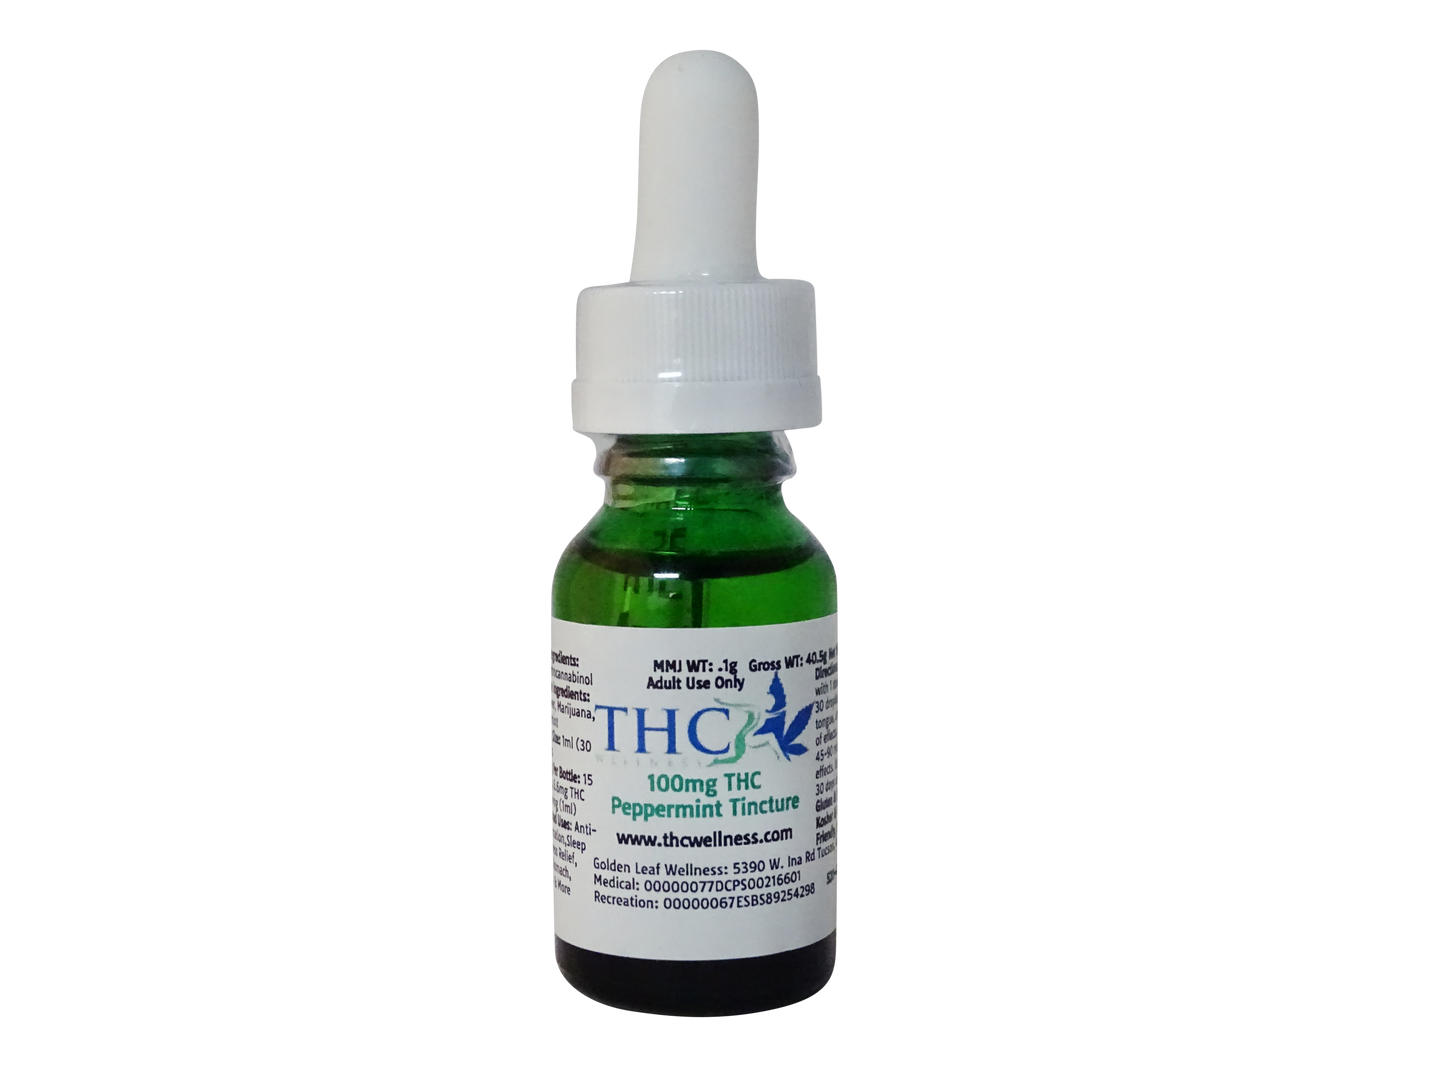 .5oz 100mg THC Peppermint Tincture